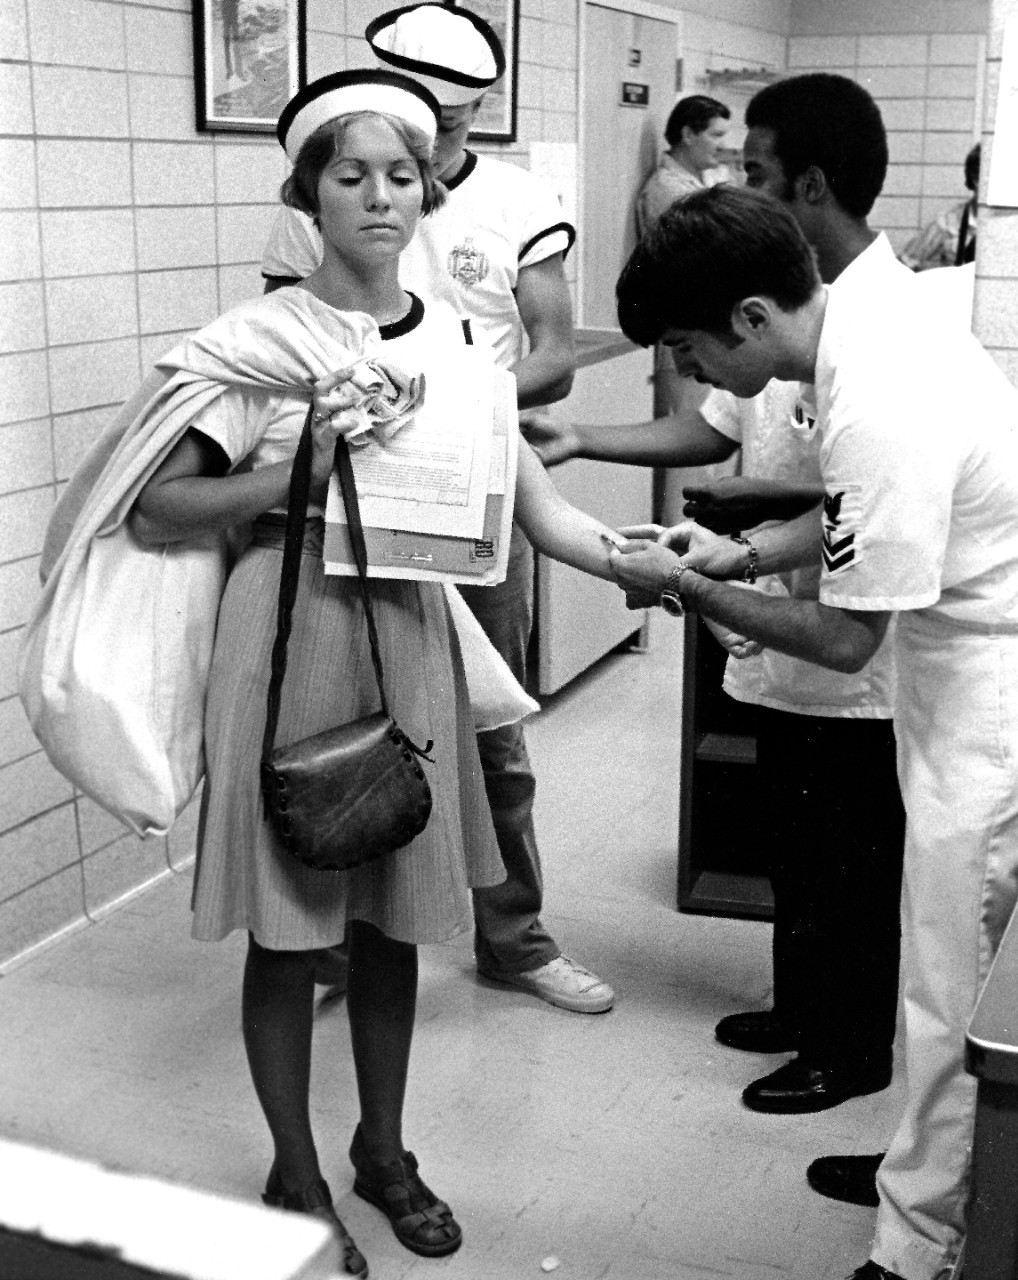 USN 1167421:   Woman Midshipman Janet F. Kotowsky, July 1976.  Kotowsky, receives an inoculation during her stop at the medical station on the day of her arrival at the U.S. Naval Academy, Annapolis, Maryland.  Photographed by PH2 Erich J. Wirth, July 6, 1976.   Official U.S. Navy Photograph, now in the collections of the National Archives.   